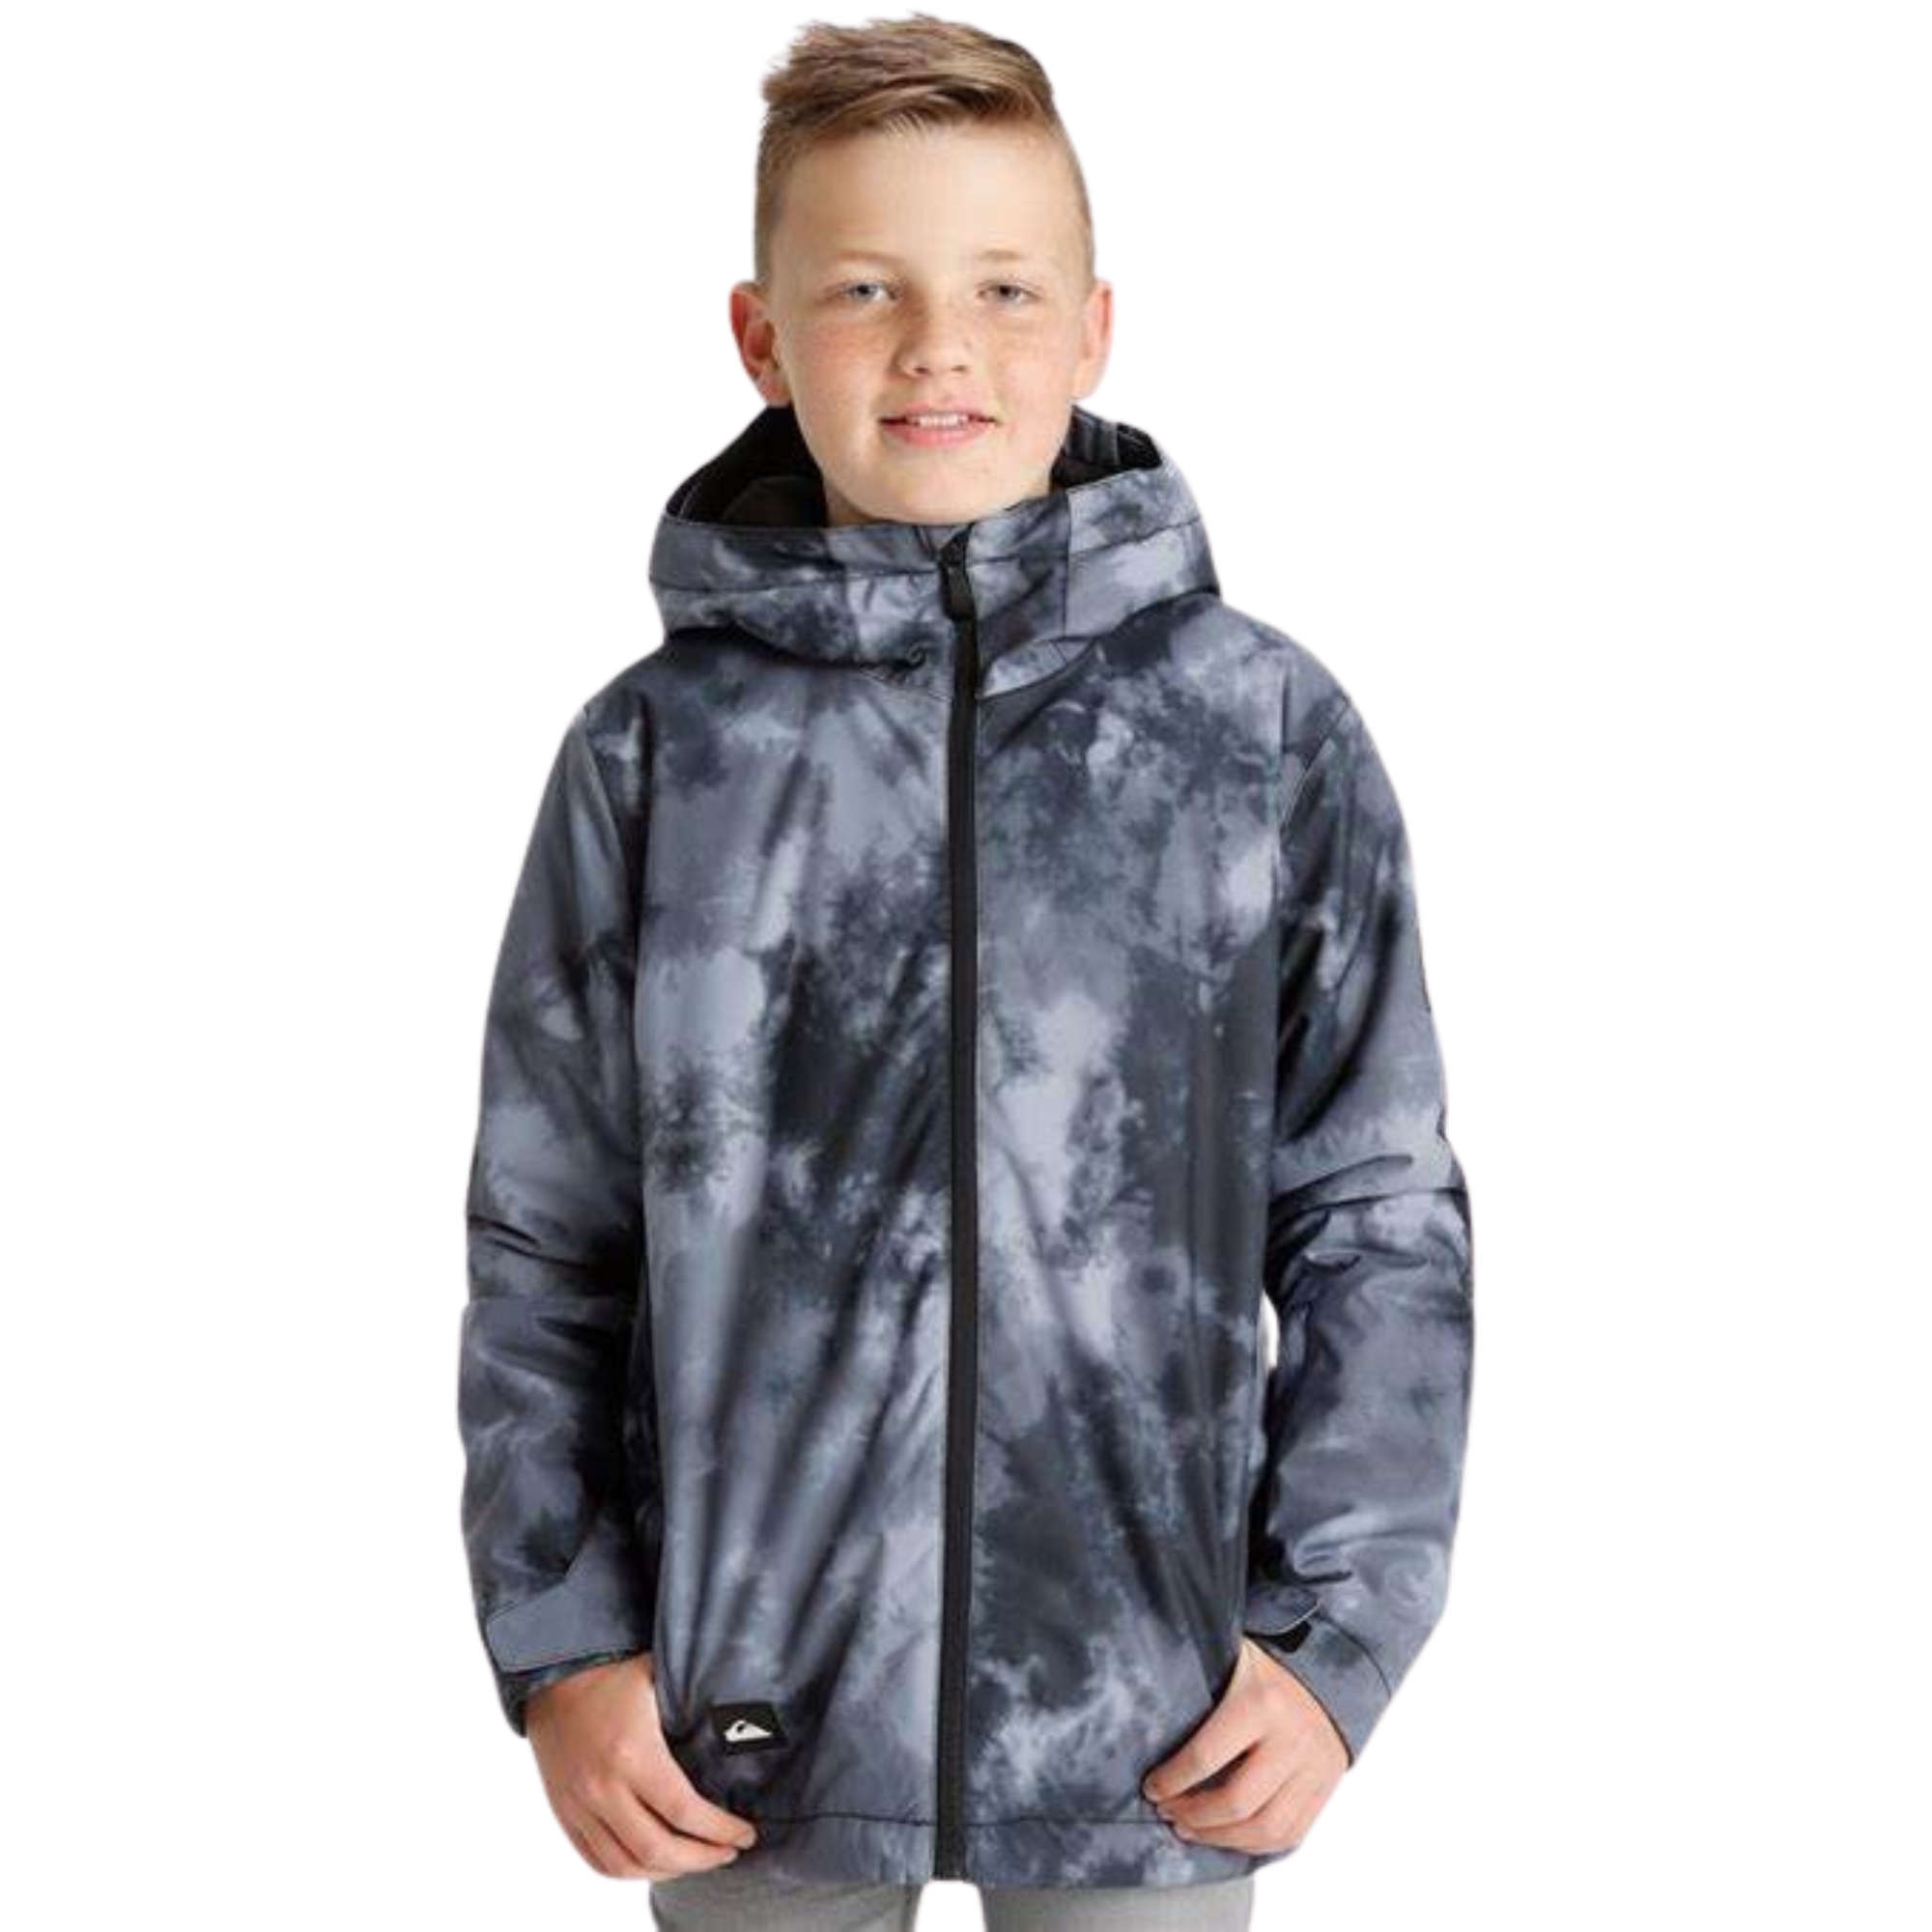 Quiksilver Mission Printed Youth Jacket - Quiet Storm